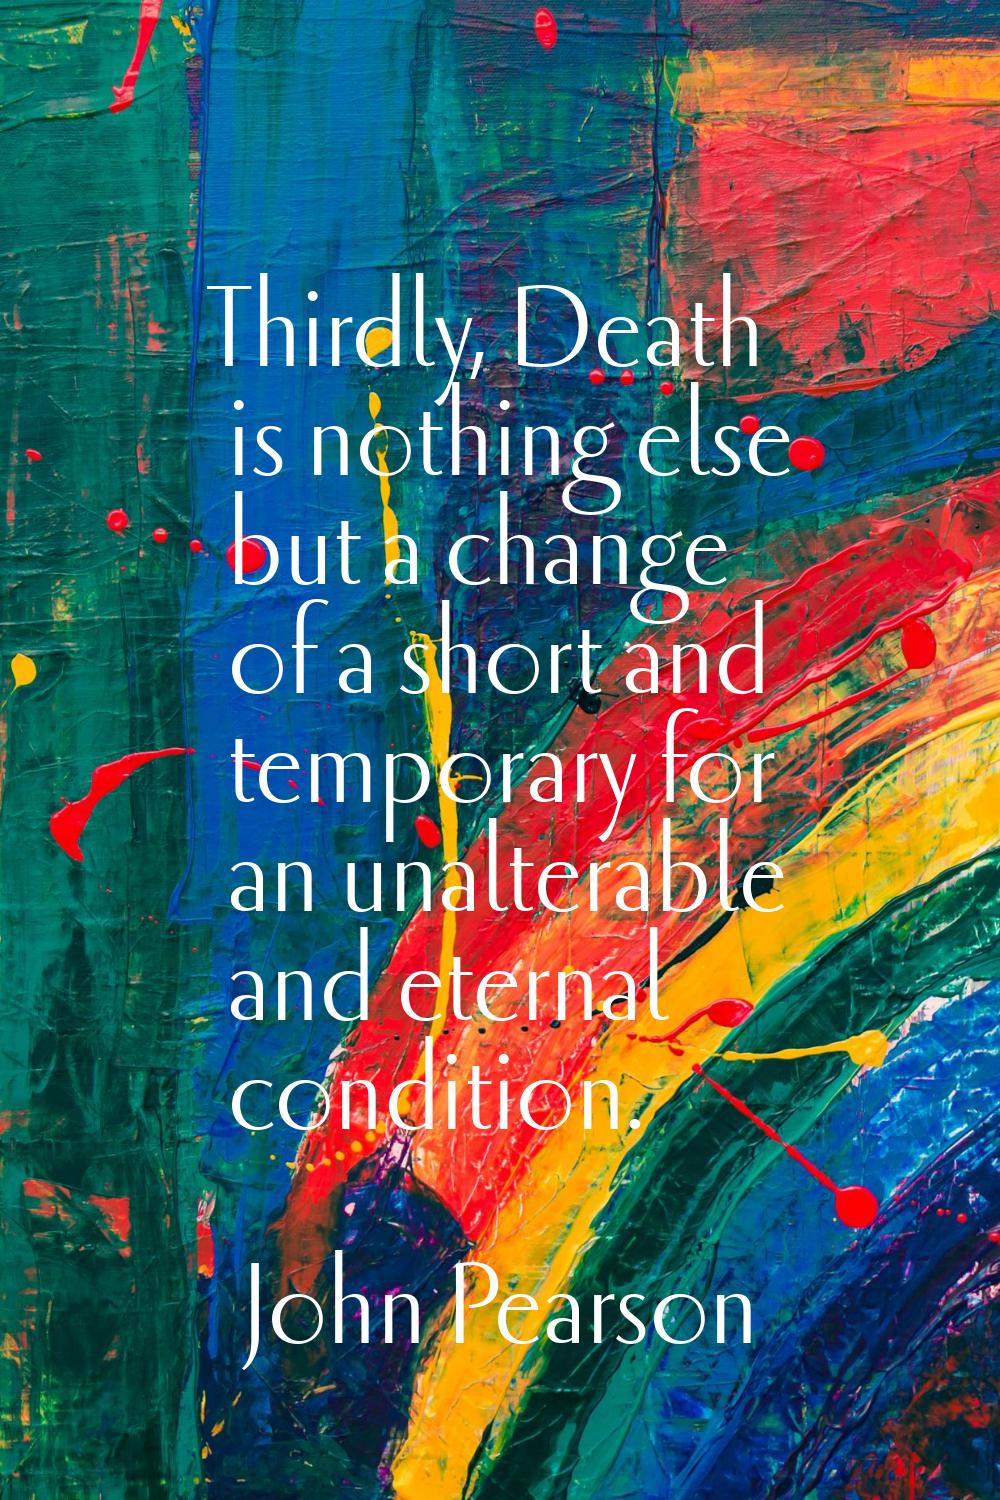 Thirdly, Death is nothing else but a change of a short and temporary for an unalterable and eternal